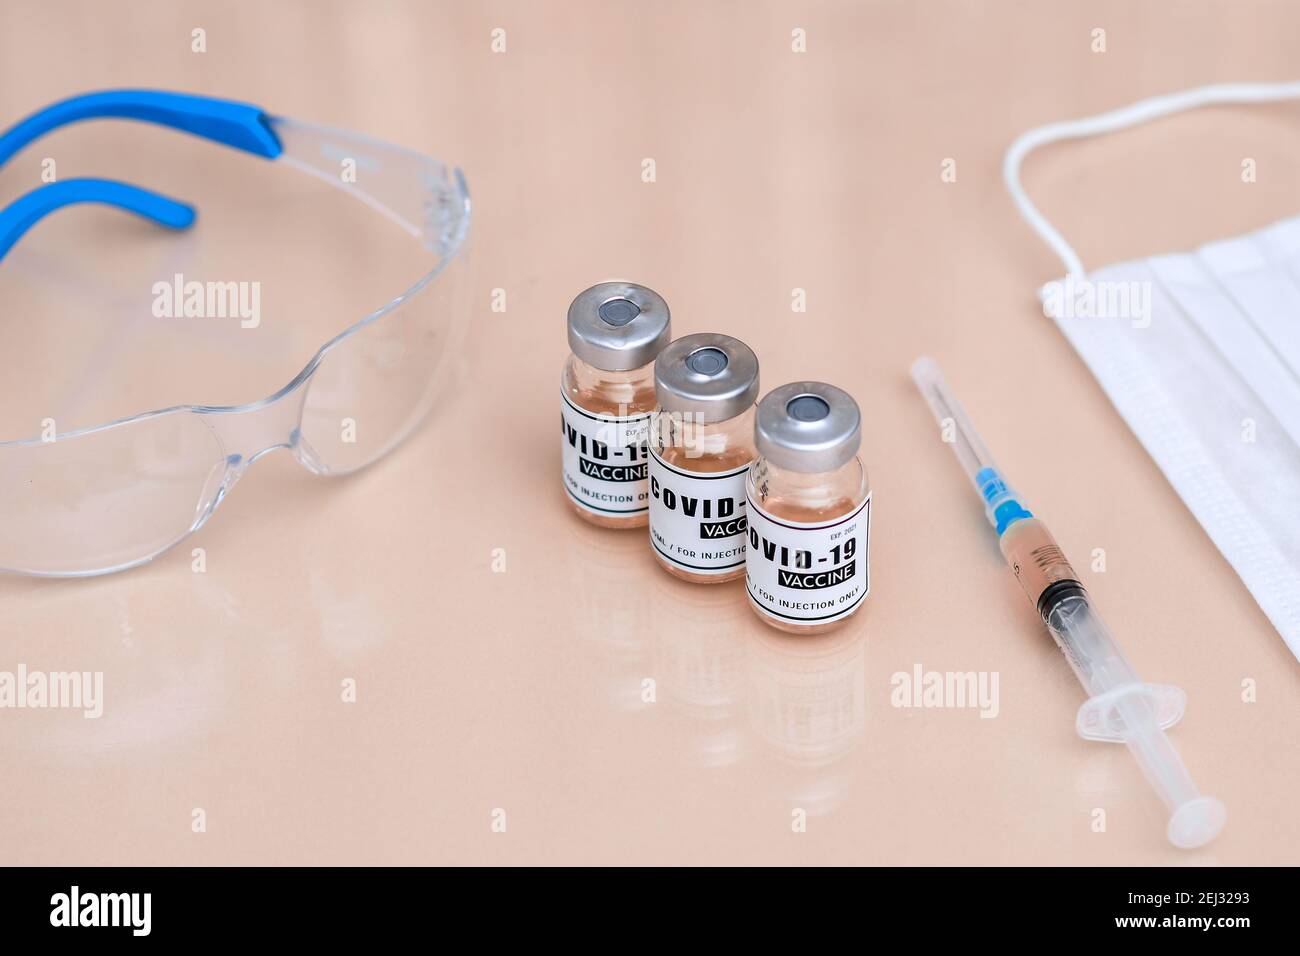 A bottle of of coronavirus vaccine. a dialed syringe on the table.  Stock Photo